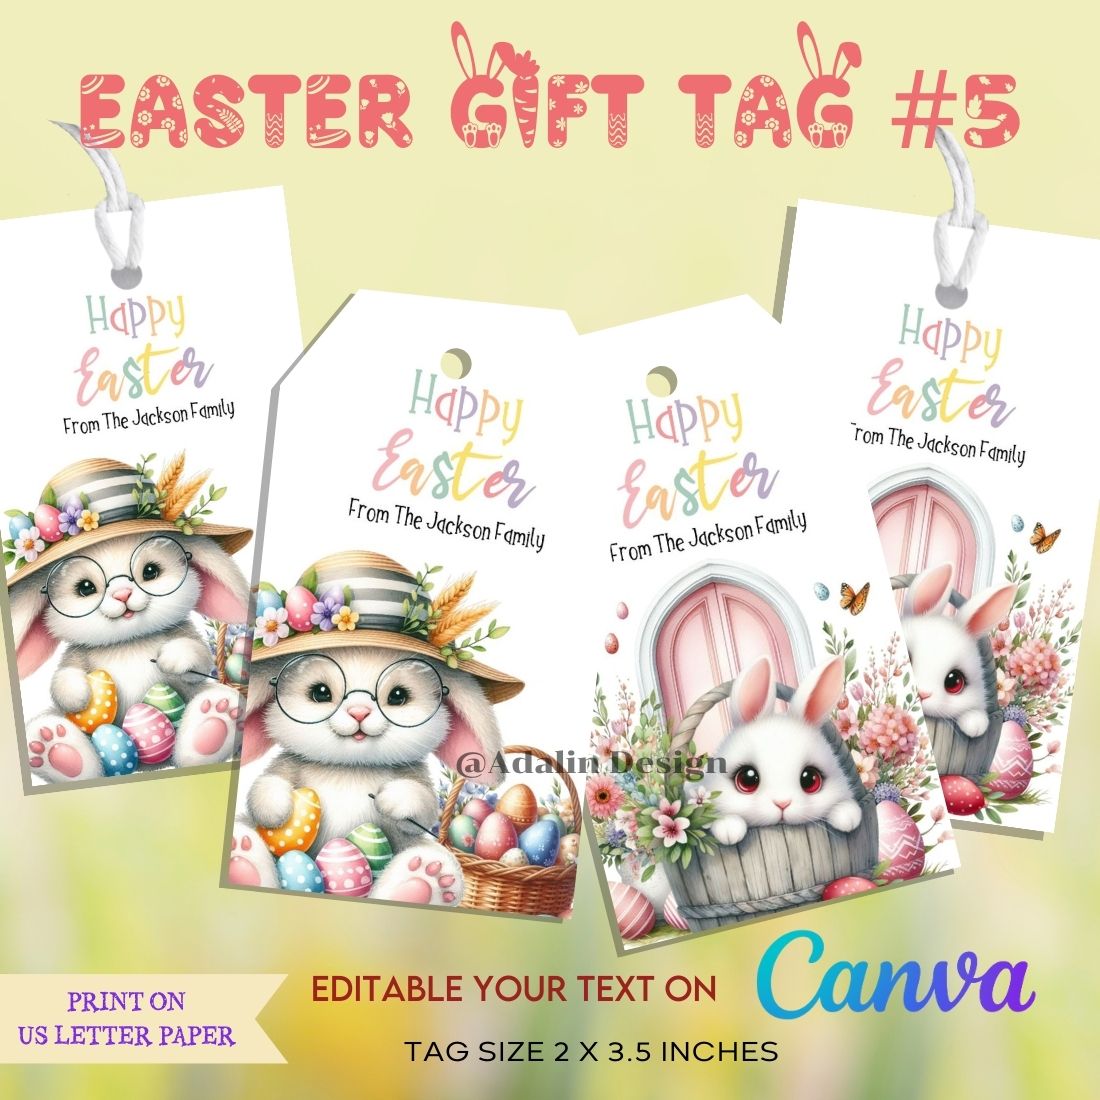 Easter Gift Tags #5 cover image.